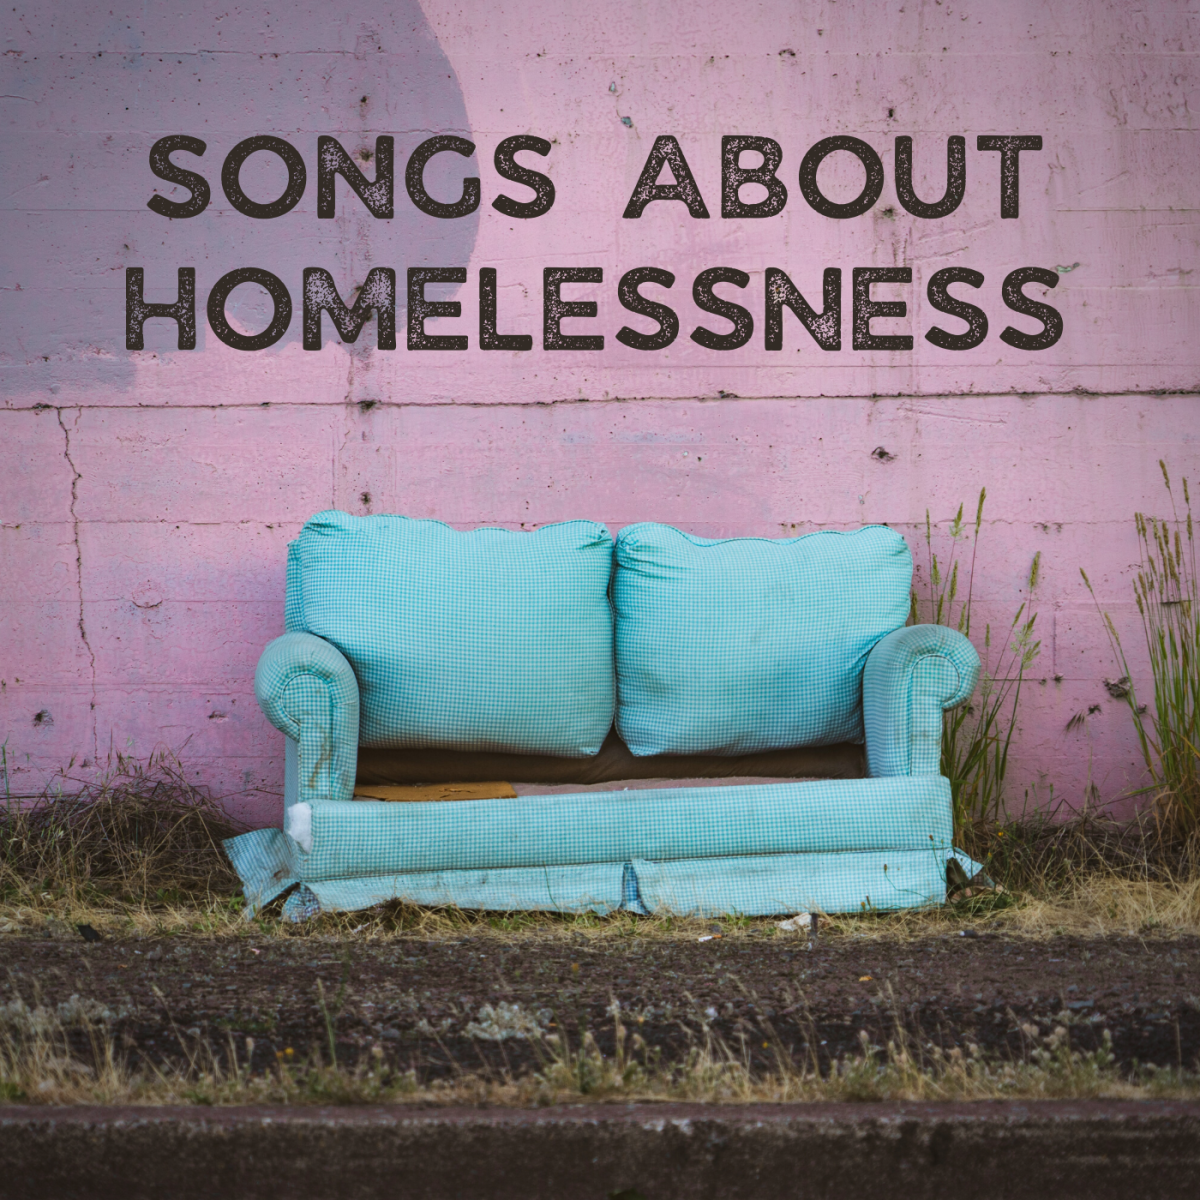 10 Songs About Being Homeless